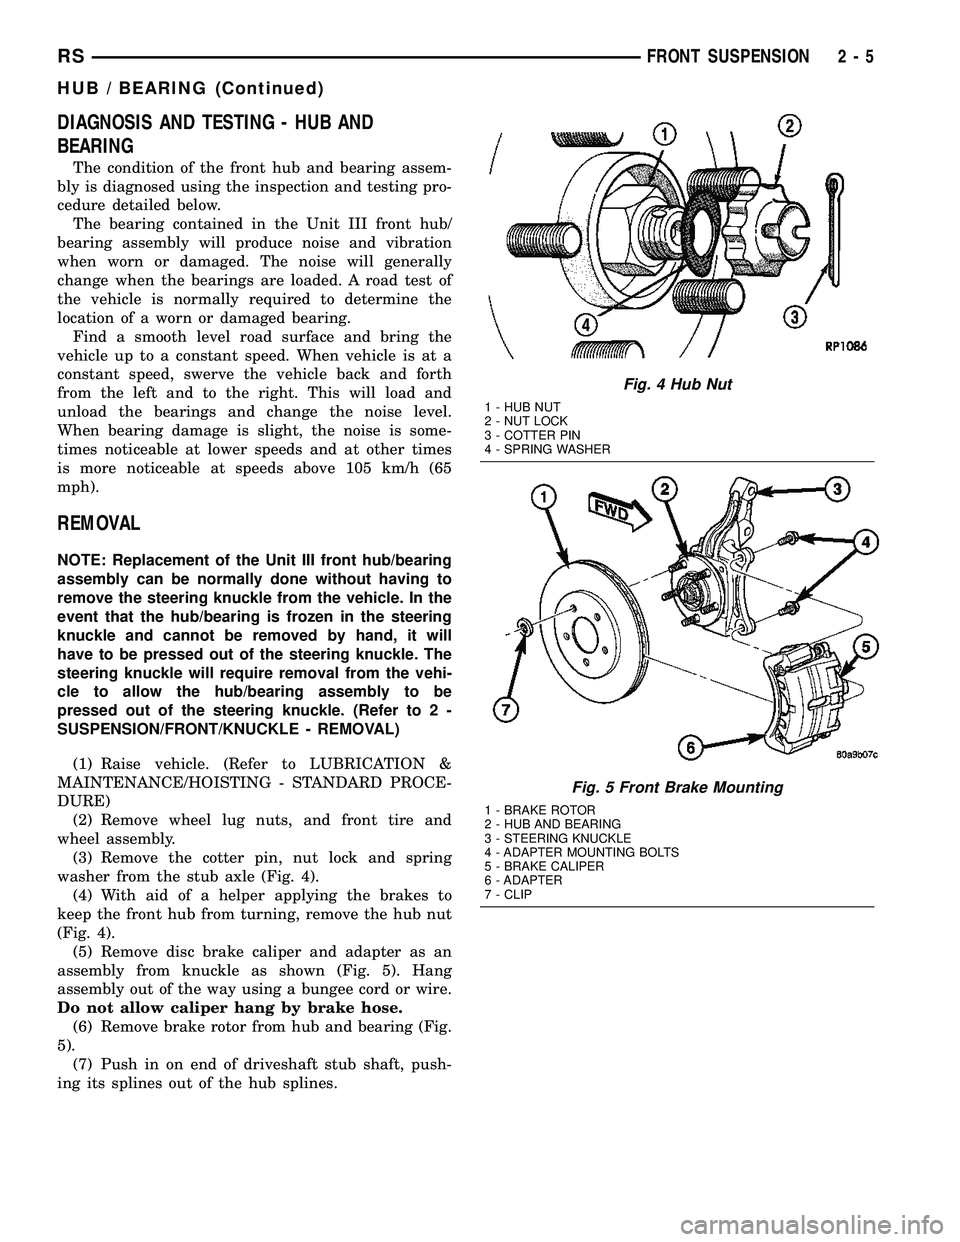 DODGE TOWN AND COUNTRY 2004 Workshop Manual DIAGNOSIS AND TESTING - HUB AND
BEARING
The condition of the front hub and bearing assem-
bly is diagnosed using the inspection and testing pro-
cedure detailed below.
The bearing contained in the Uni